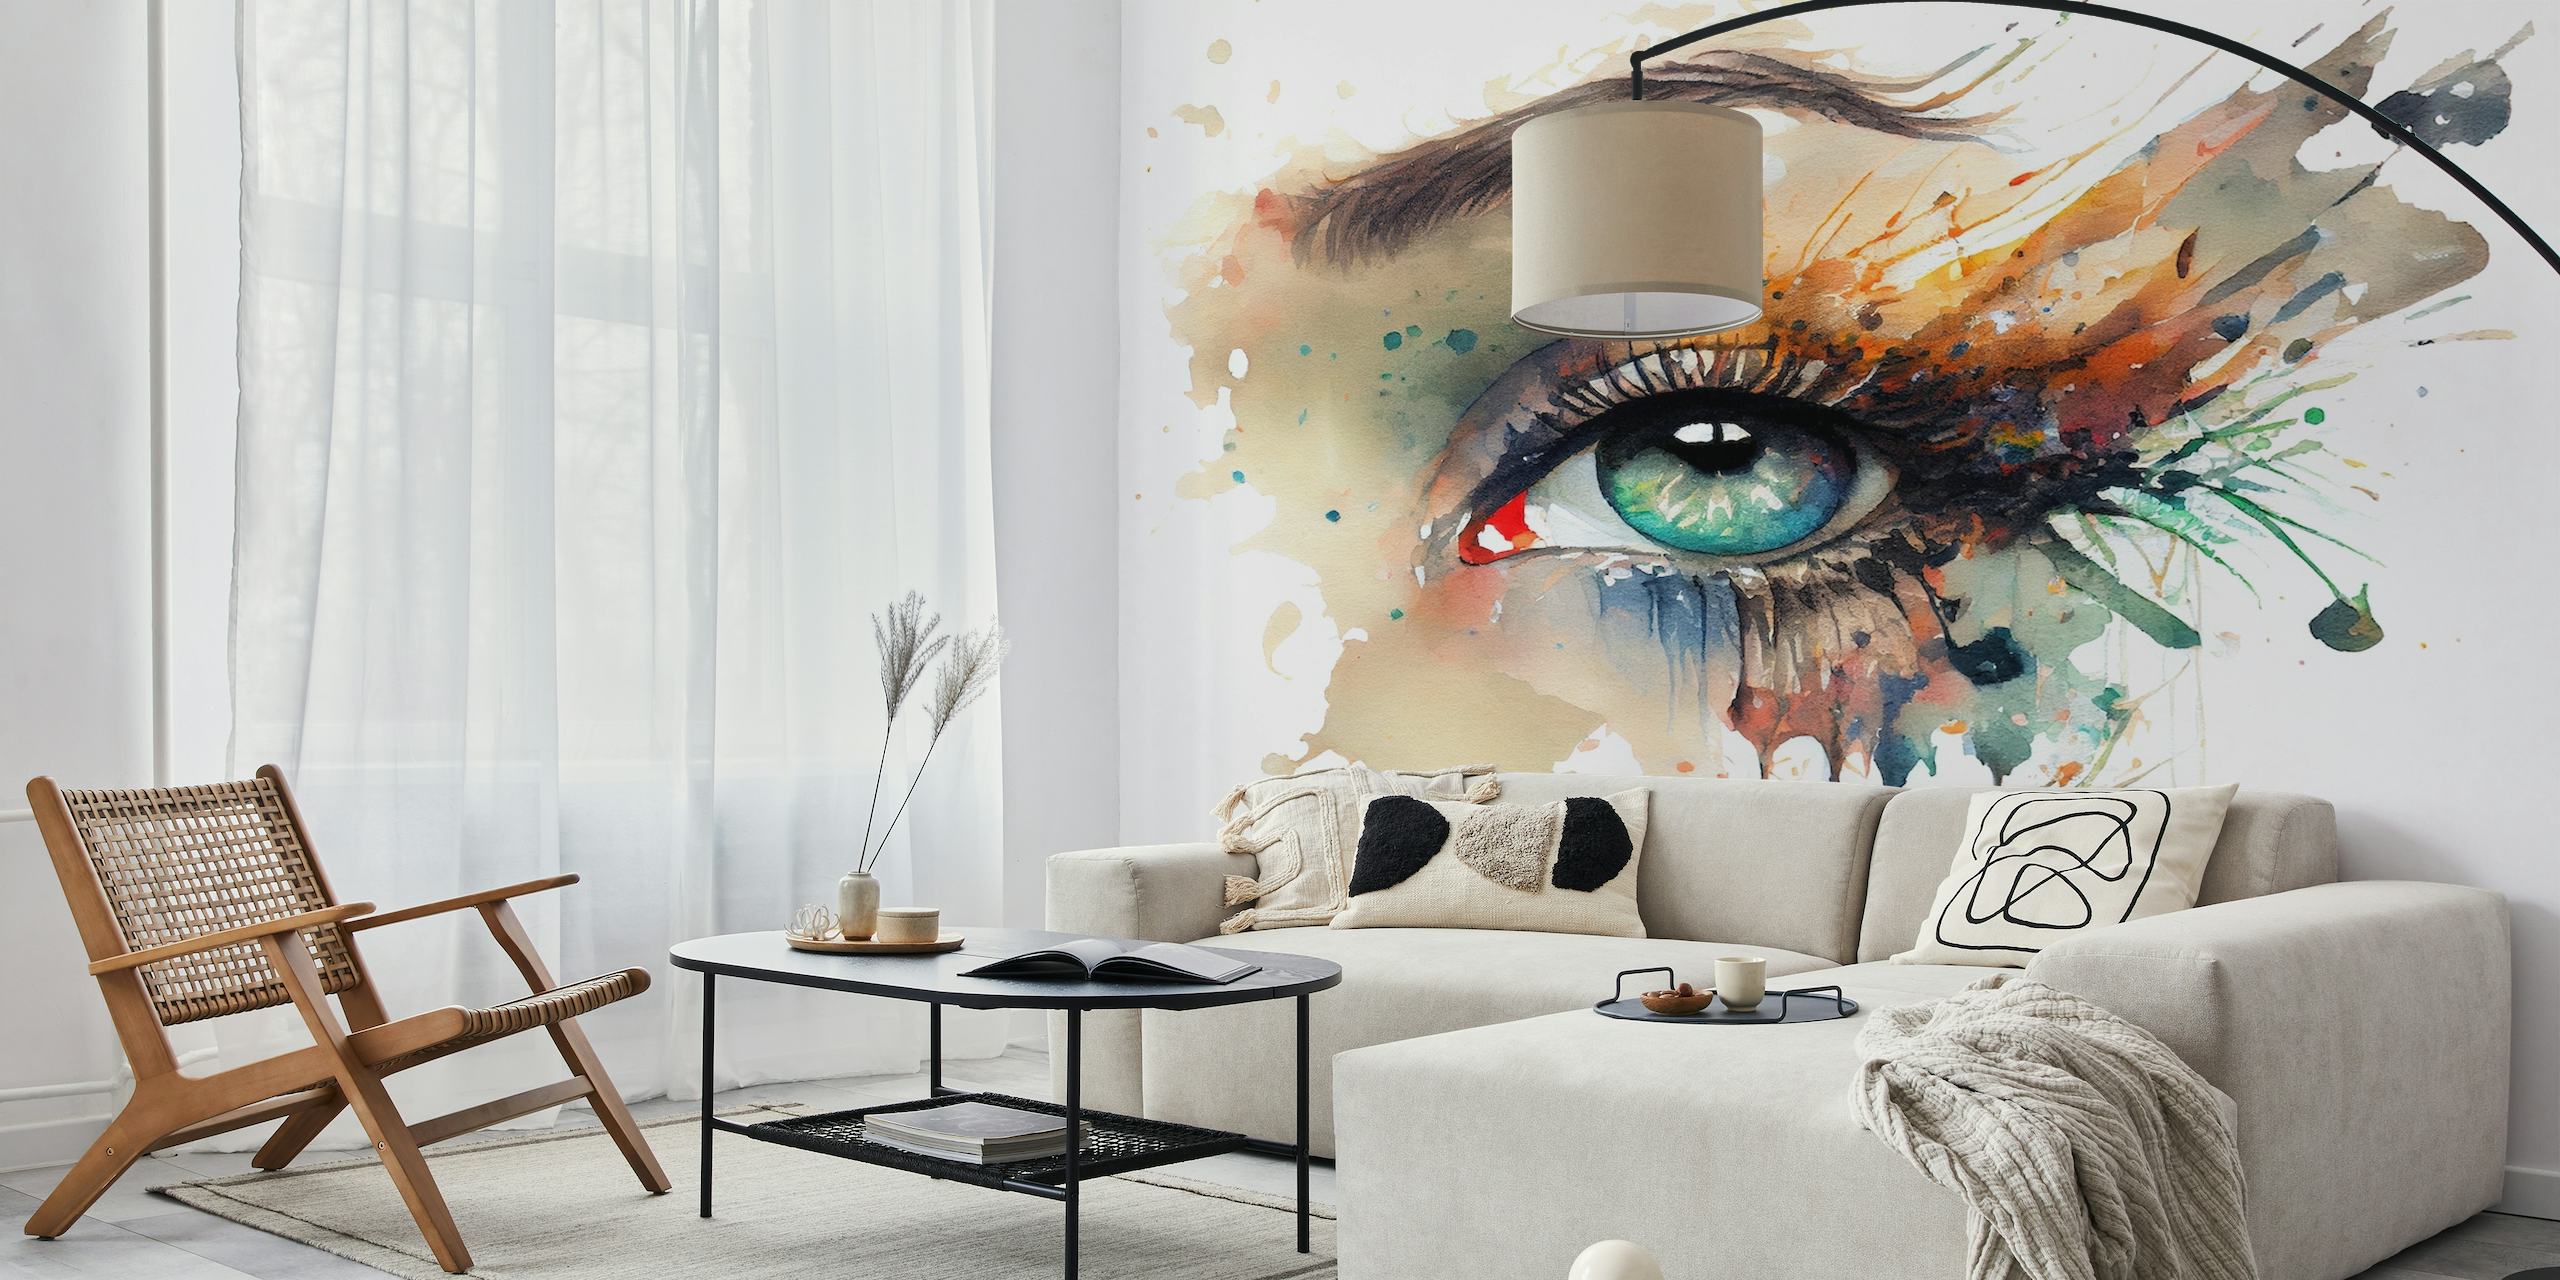 Artistic wall mural of a watercolor-painted woman's eye with vivid colors and dripping paint effect